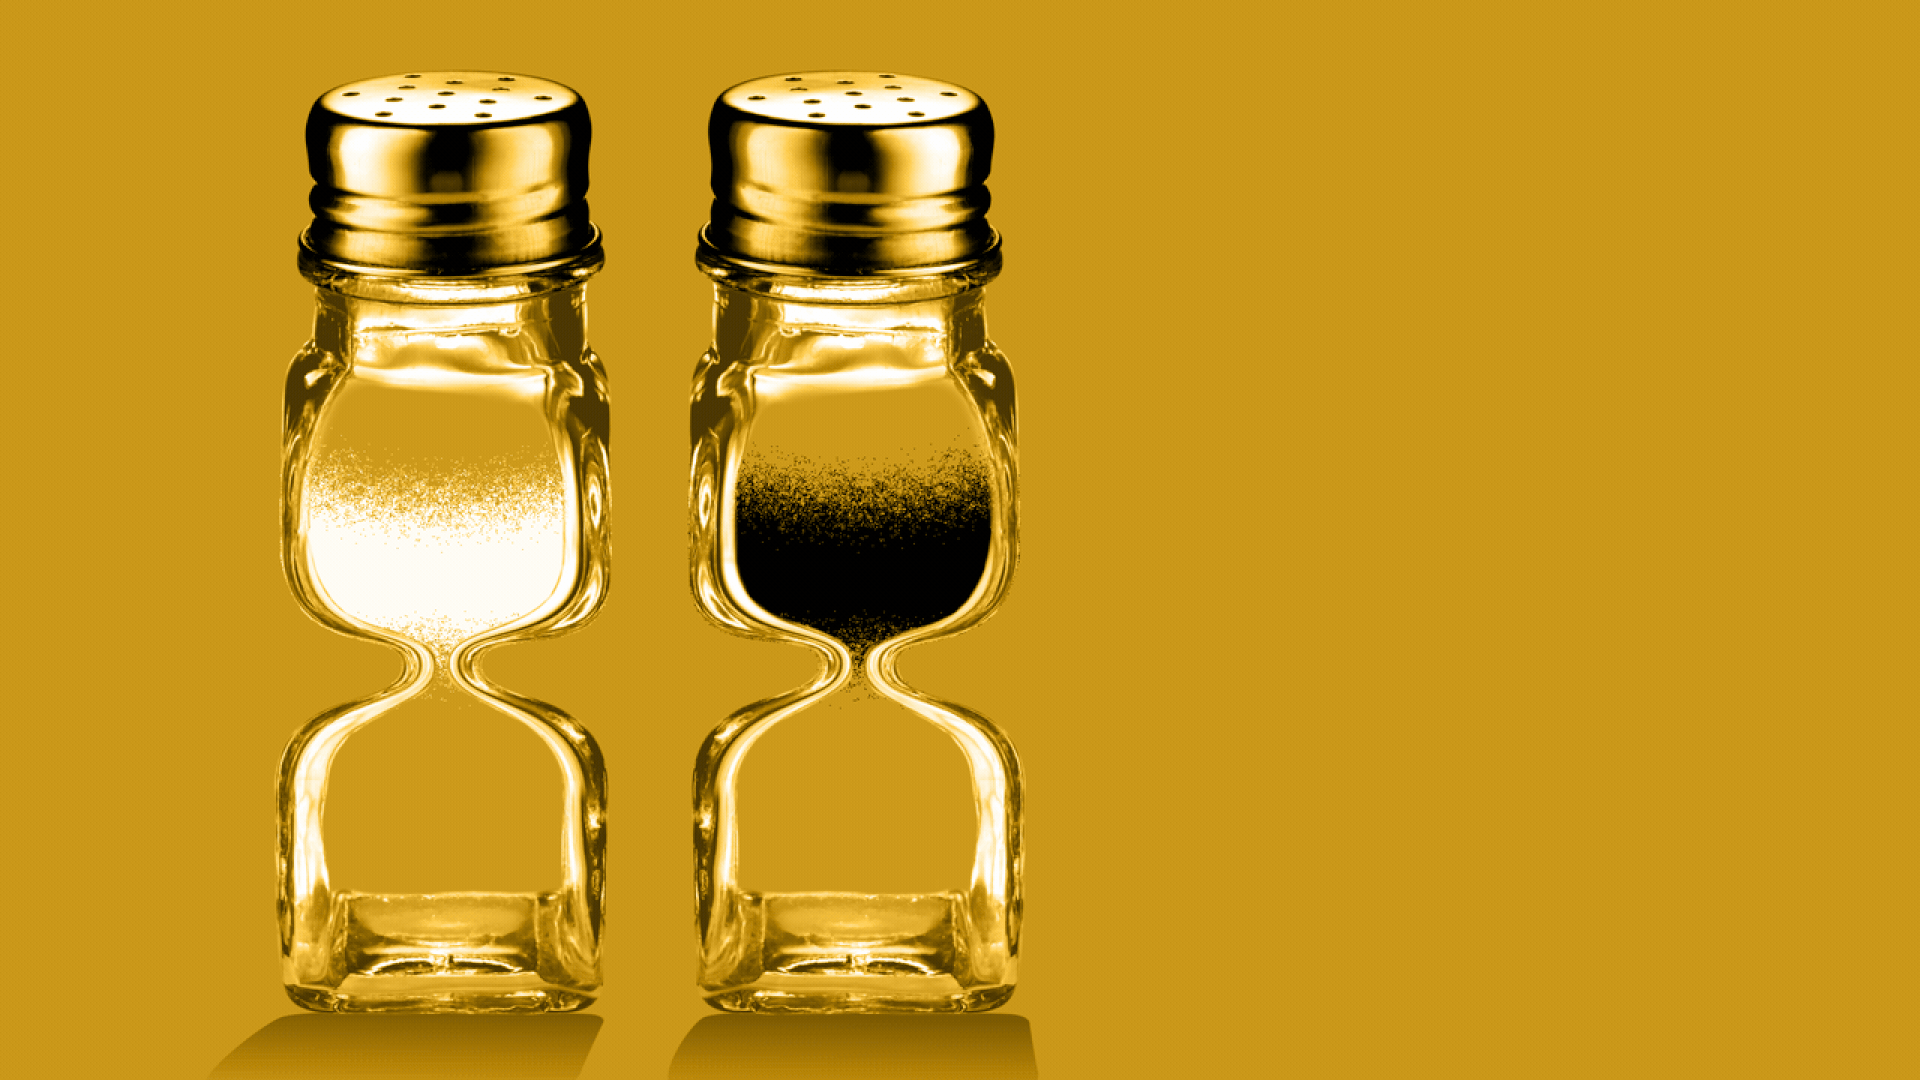 Illustration of salt and pepper shakers shaped like hourglasses, with the salt and pepper trickling down.